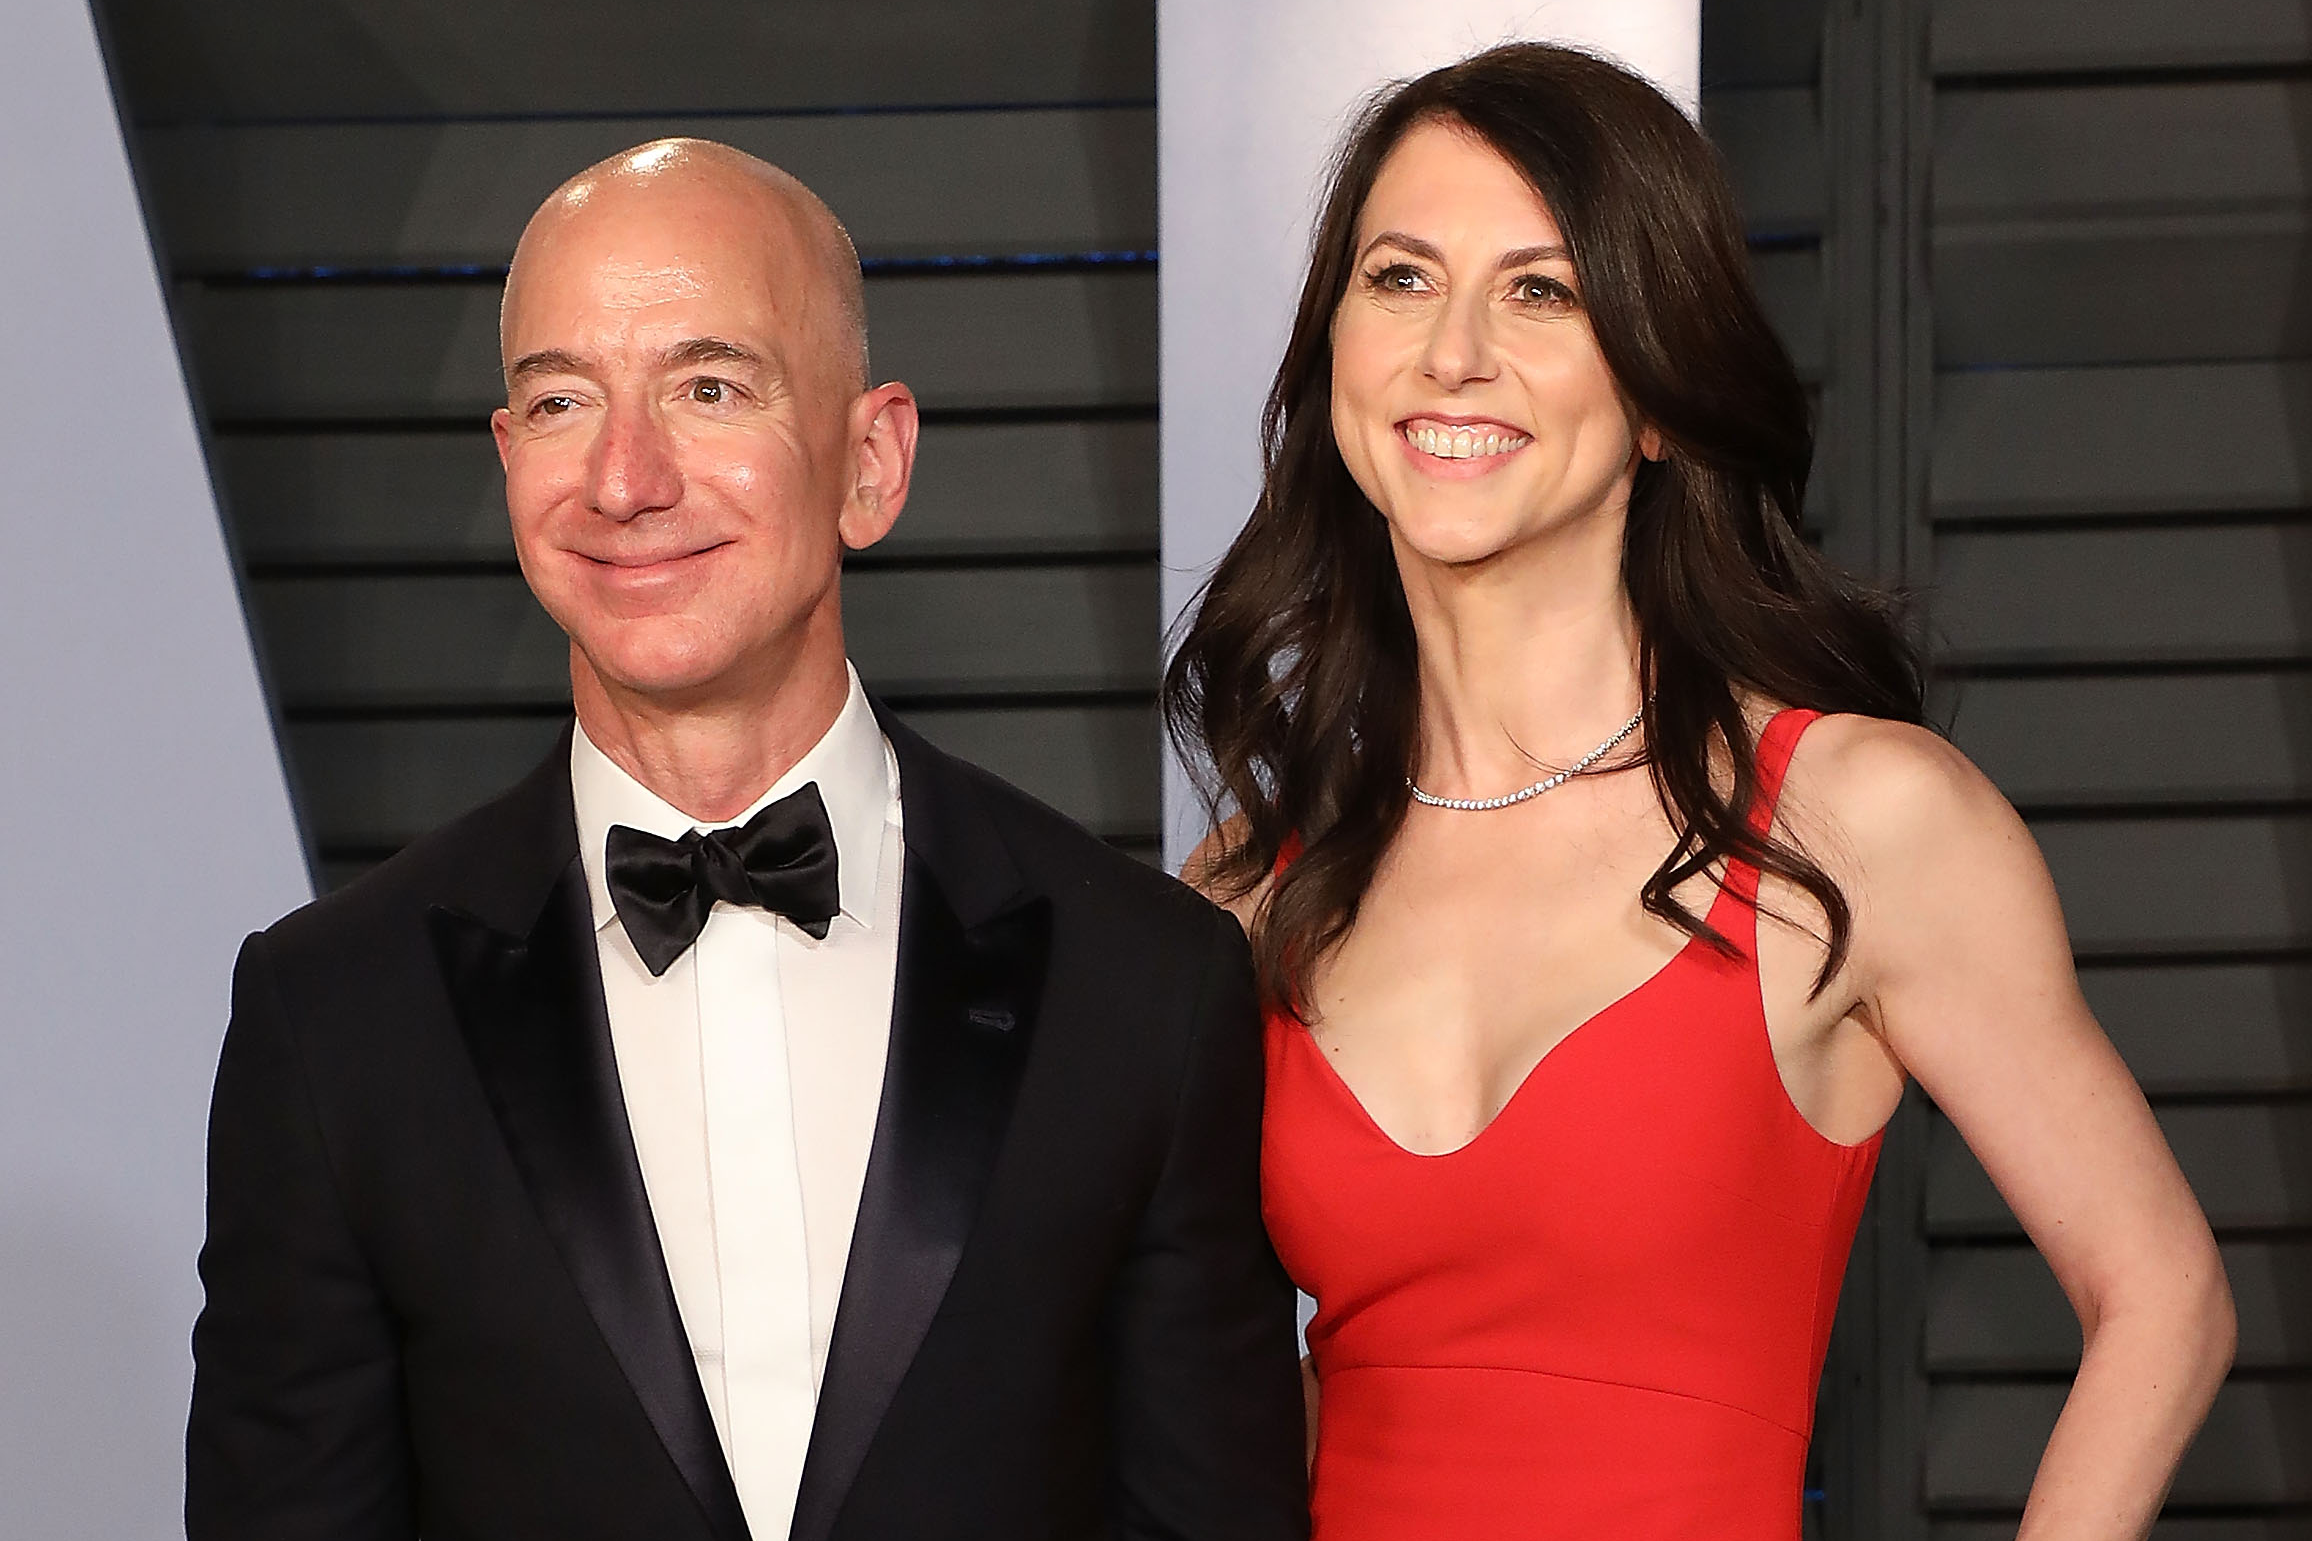 Jeff Bezos Has a Crazy Plan for How to Spend $1 Billion a Year of His Own Money